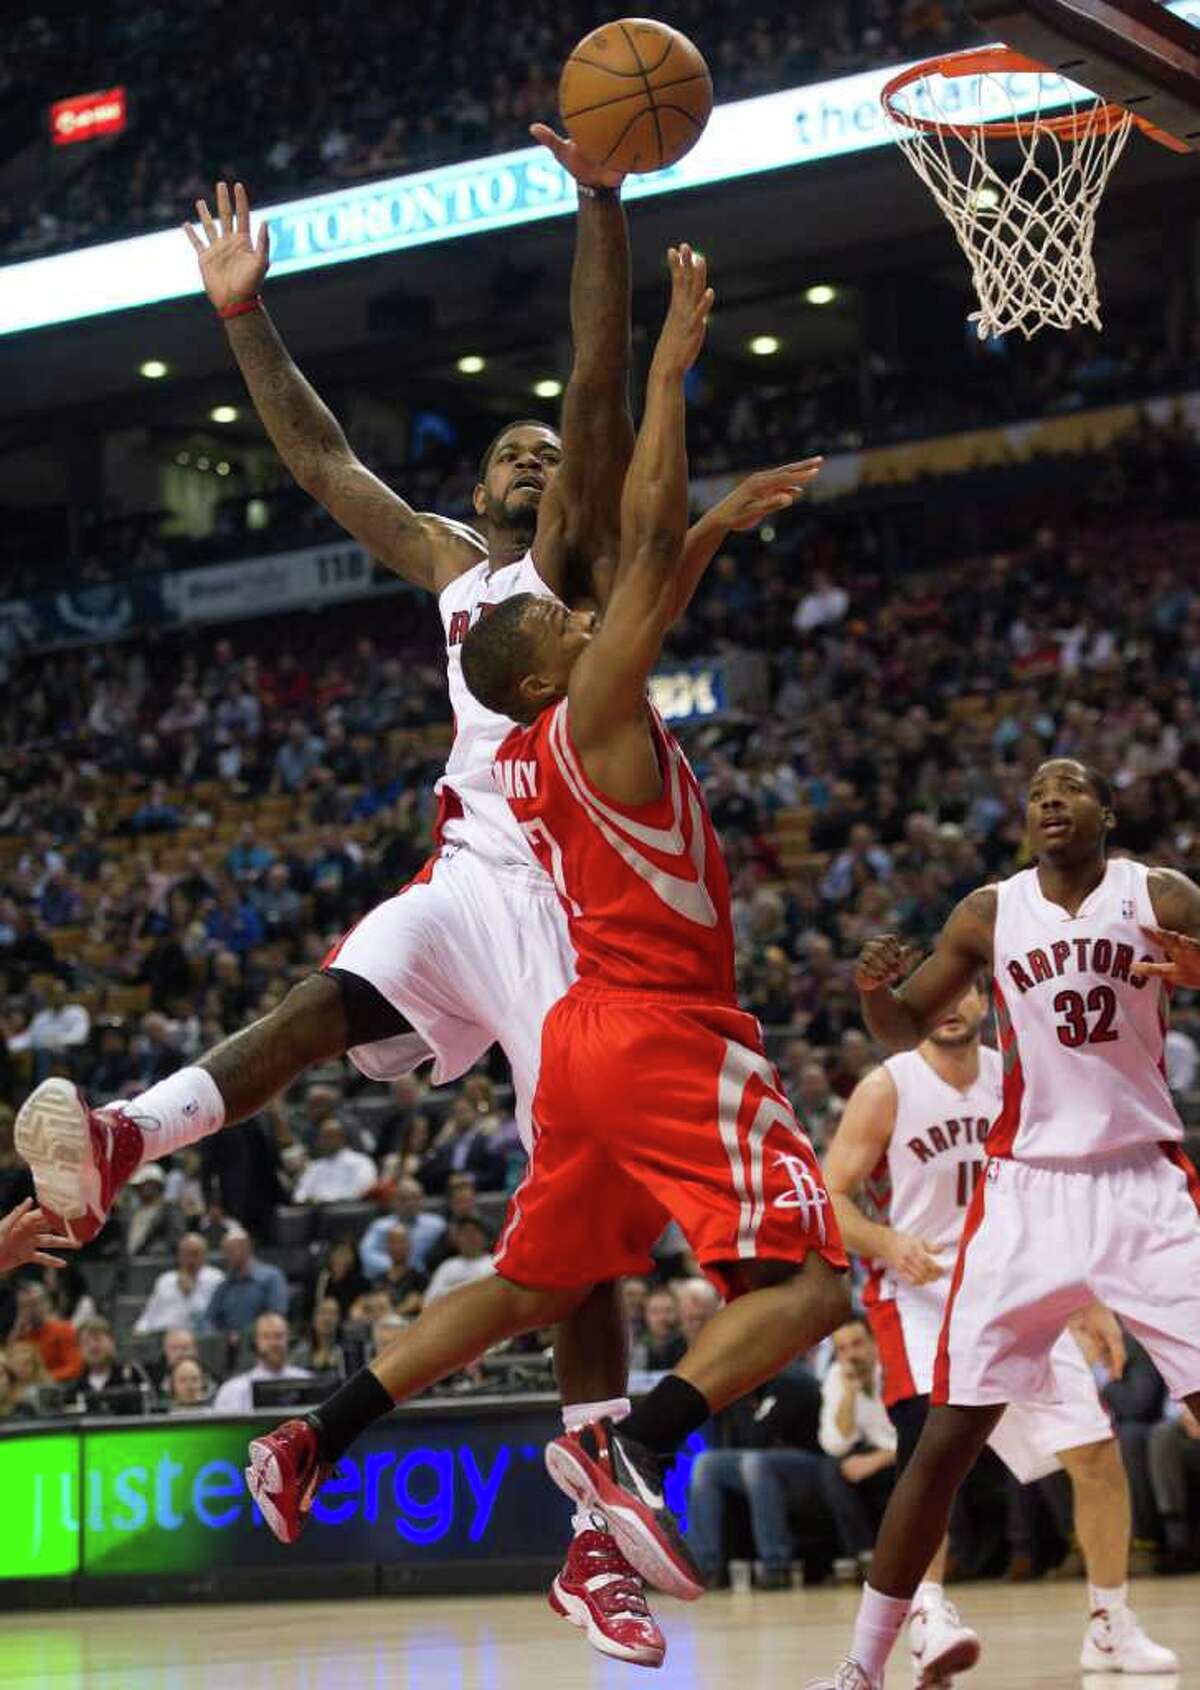 Toronto Raptors forward Amir Johnson, left, and Houston Rockets guard Kyle Lowry, center, reach for the ball during the first half of an NBA basketball game in Toronto on Wednesday, March 7, 2012. (AP Photo/The Canadian Press, Nathan Denette)